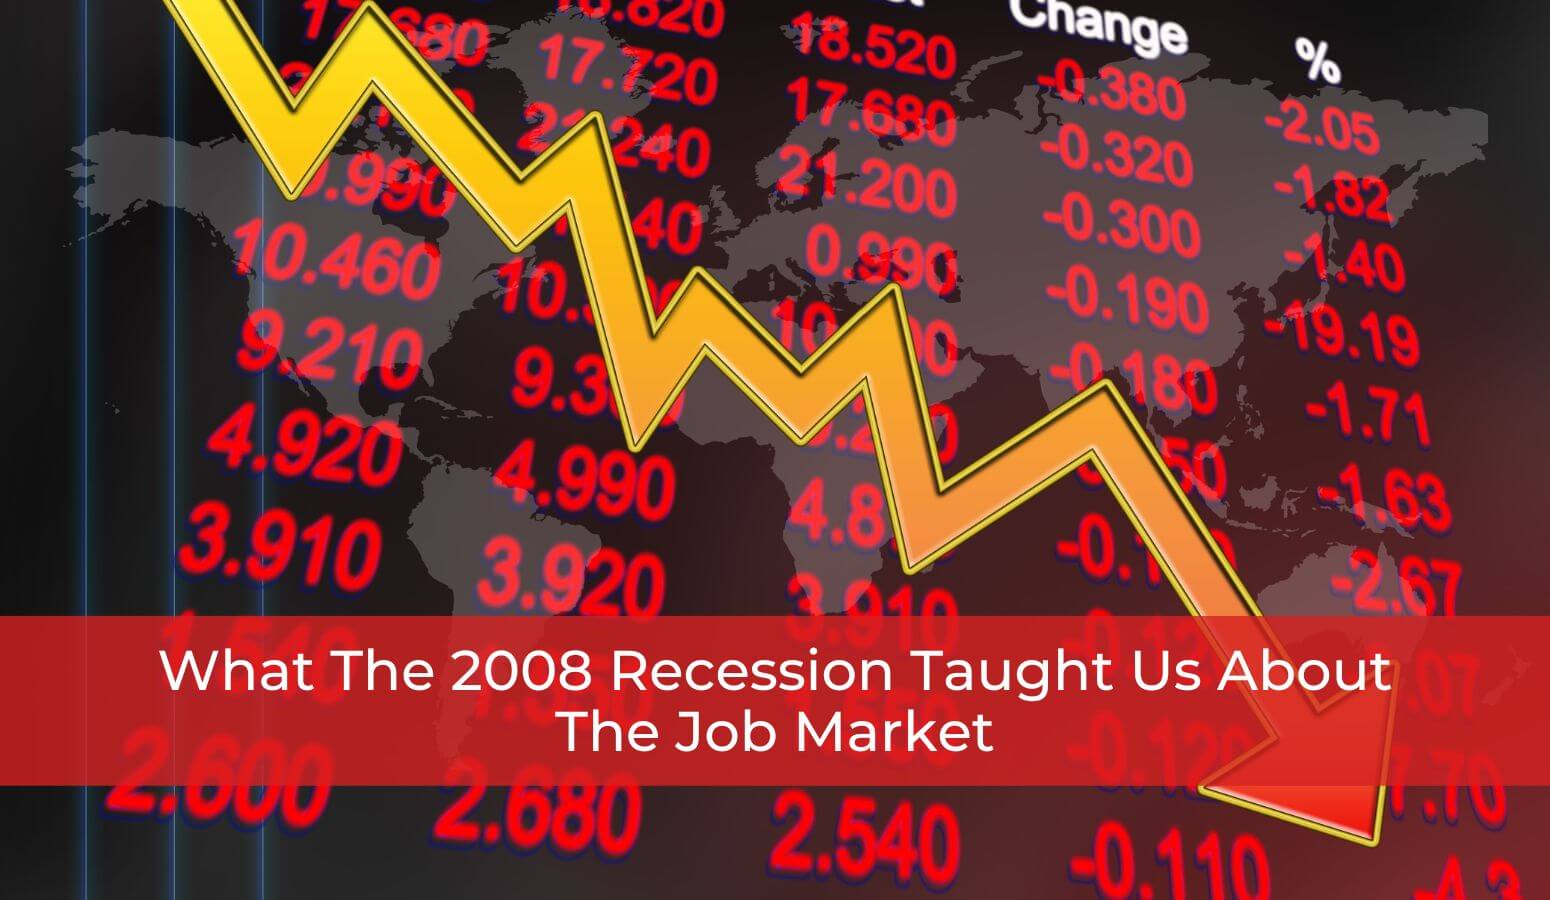 Featured image for “What The 2008 Recession Taught Us About The Job Market”